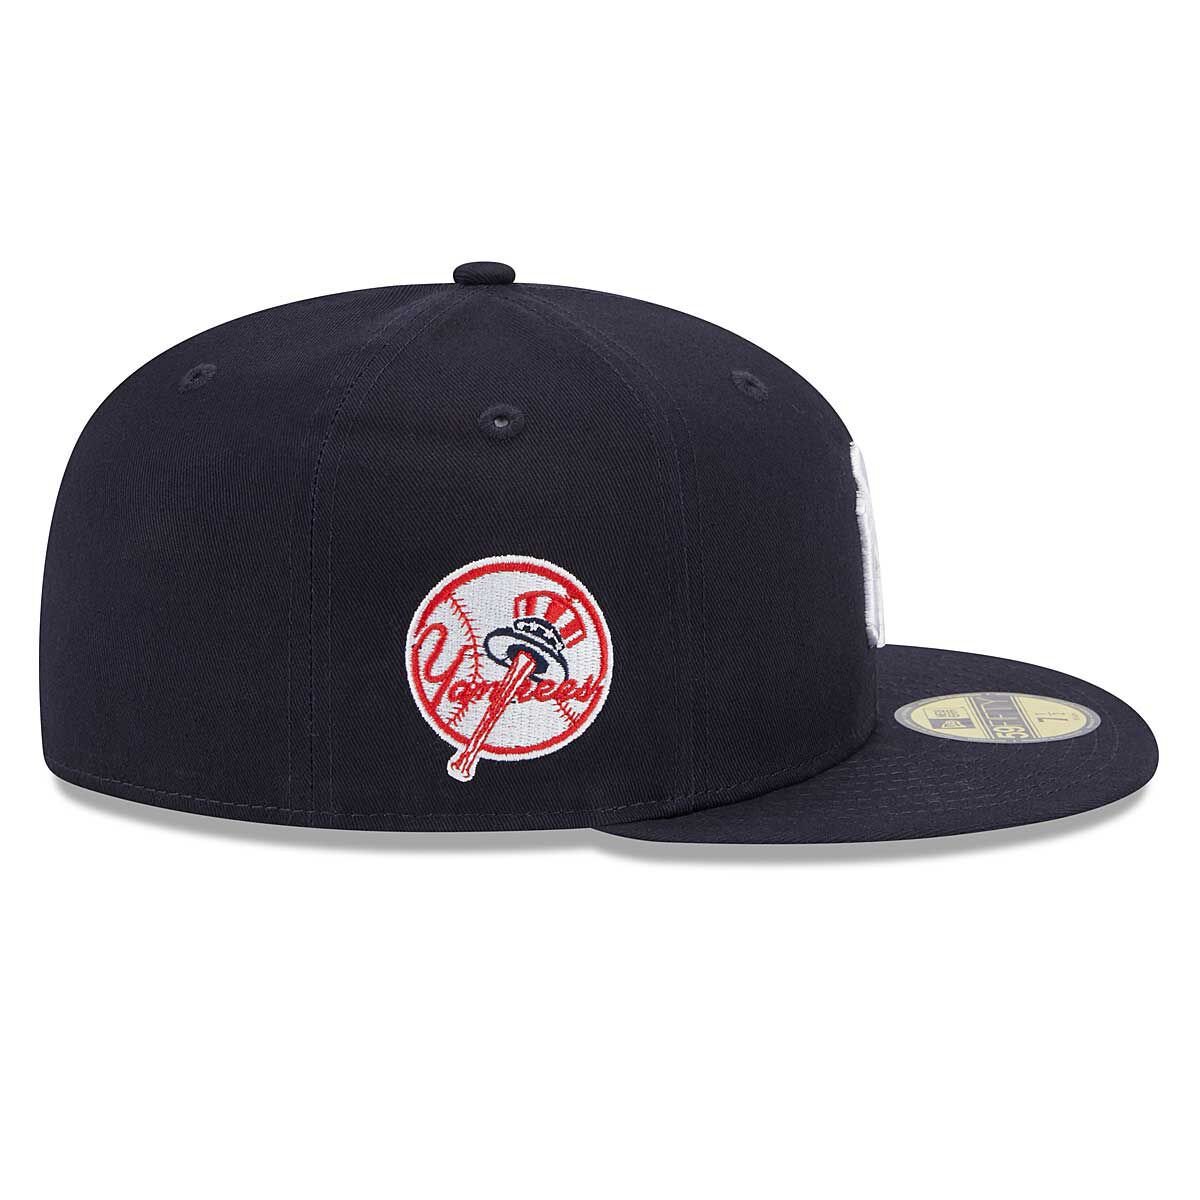 MLB NEW YORK YANKEES TEAM SIDE PATCH 59FIFTY CAP